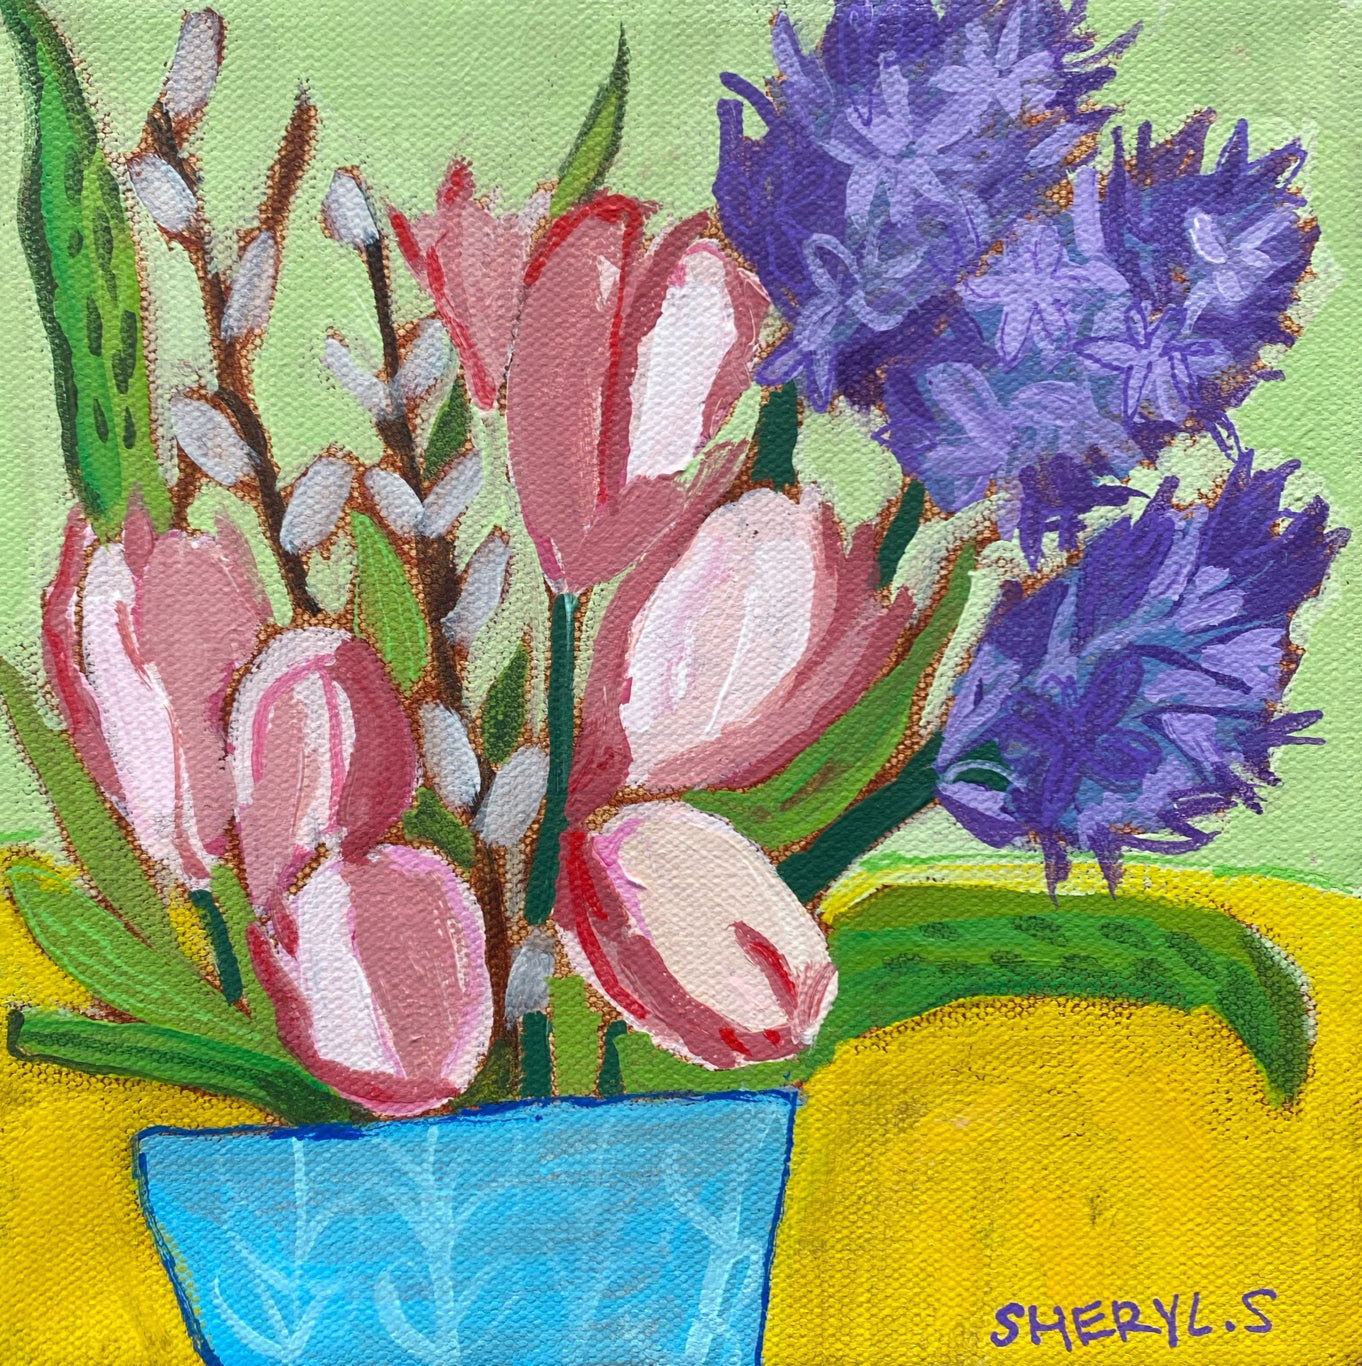 Original Wall Art / Hyacinth Tulips with Branches / 8”x8” / Painting on Canvas